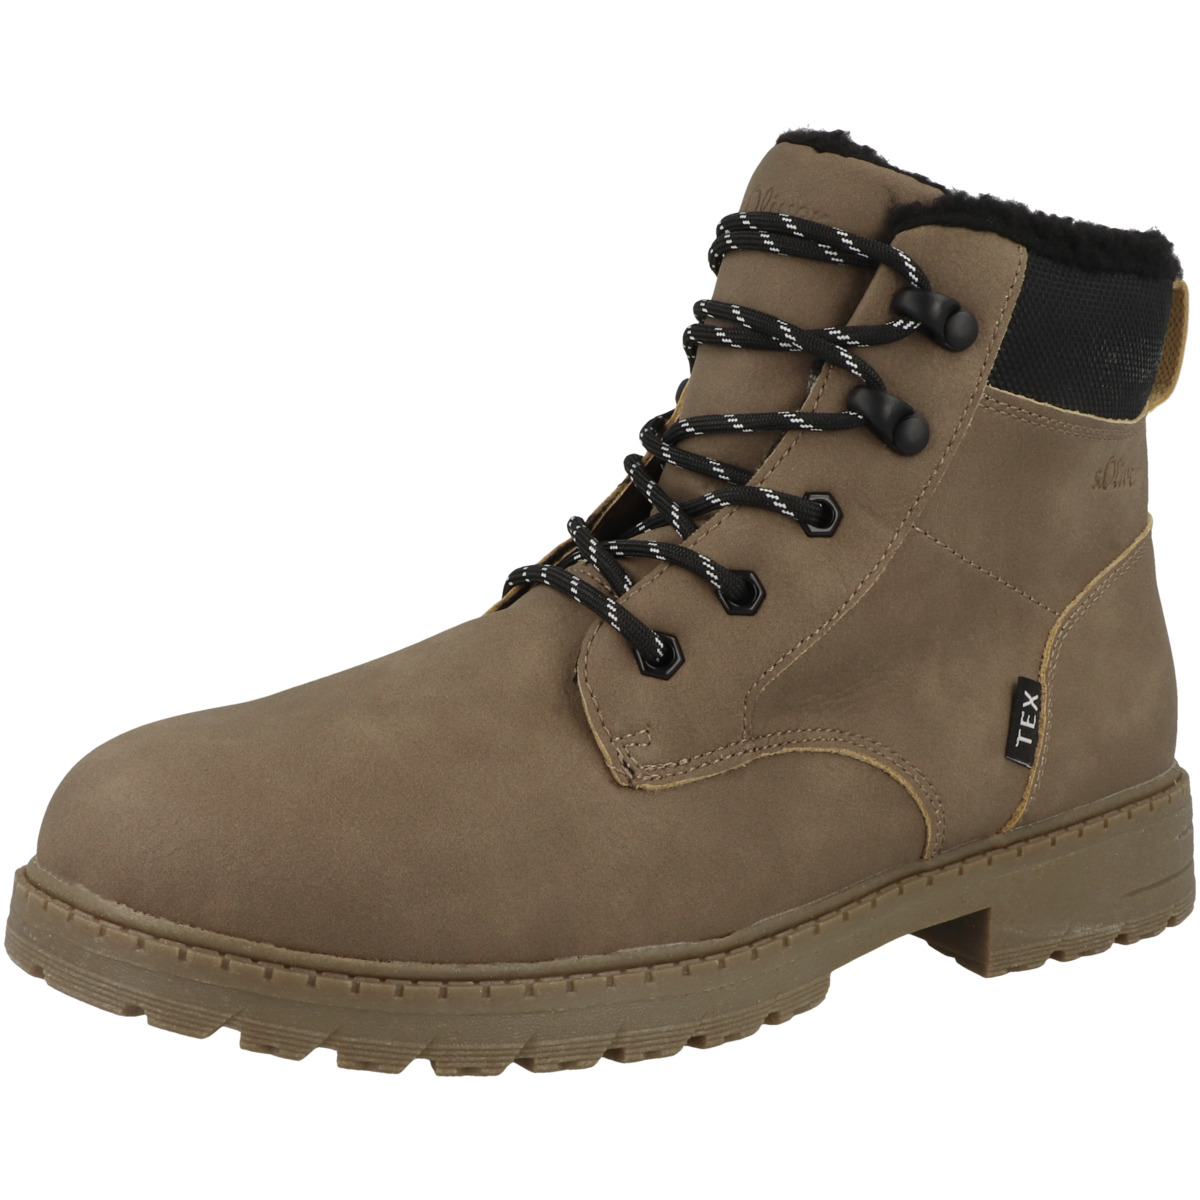 s.Oliver 5-46102-41 Boots grau